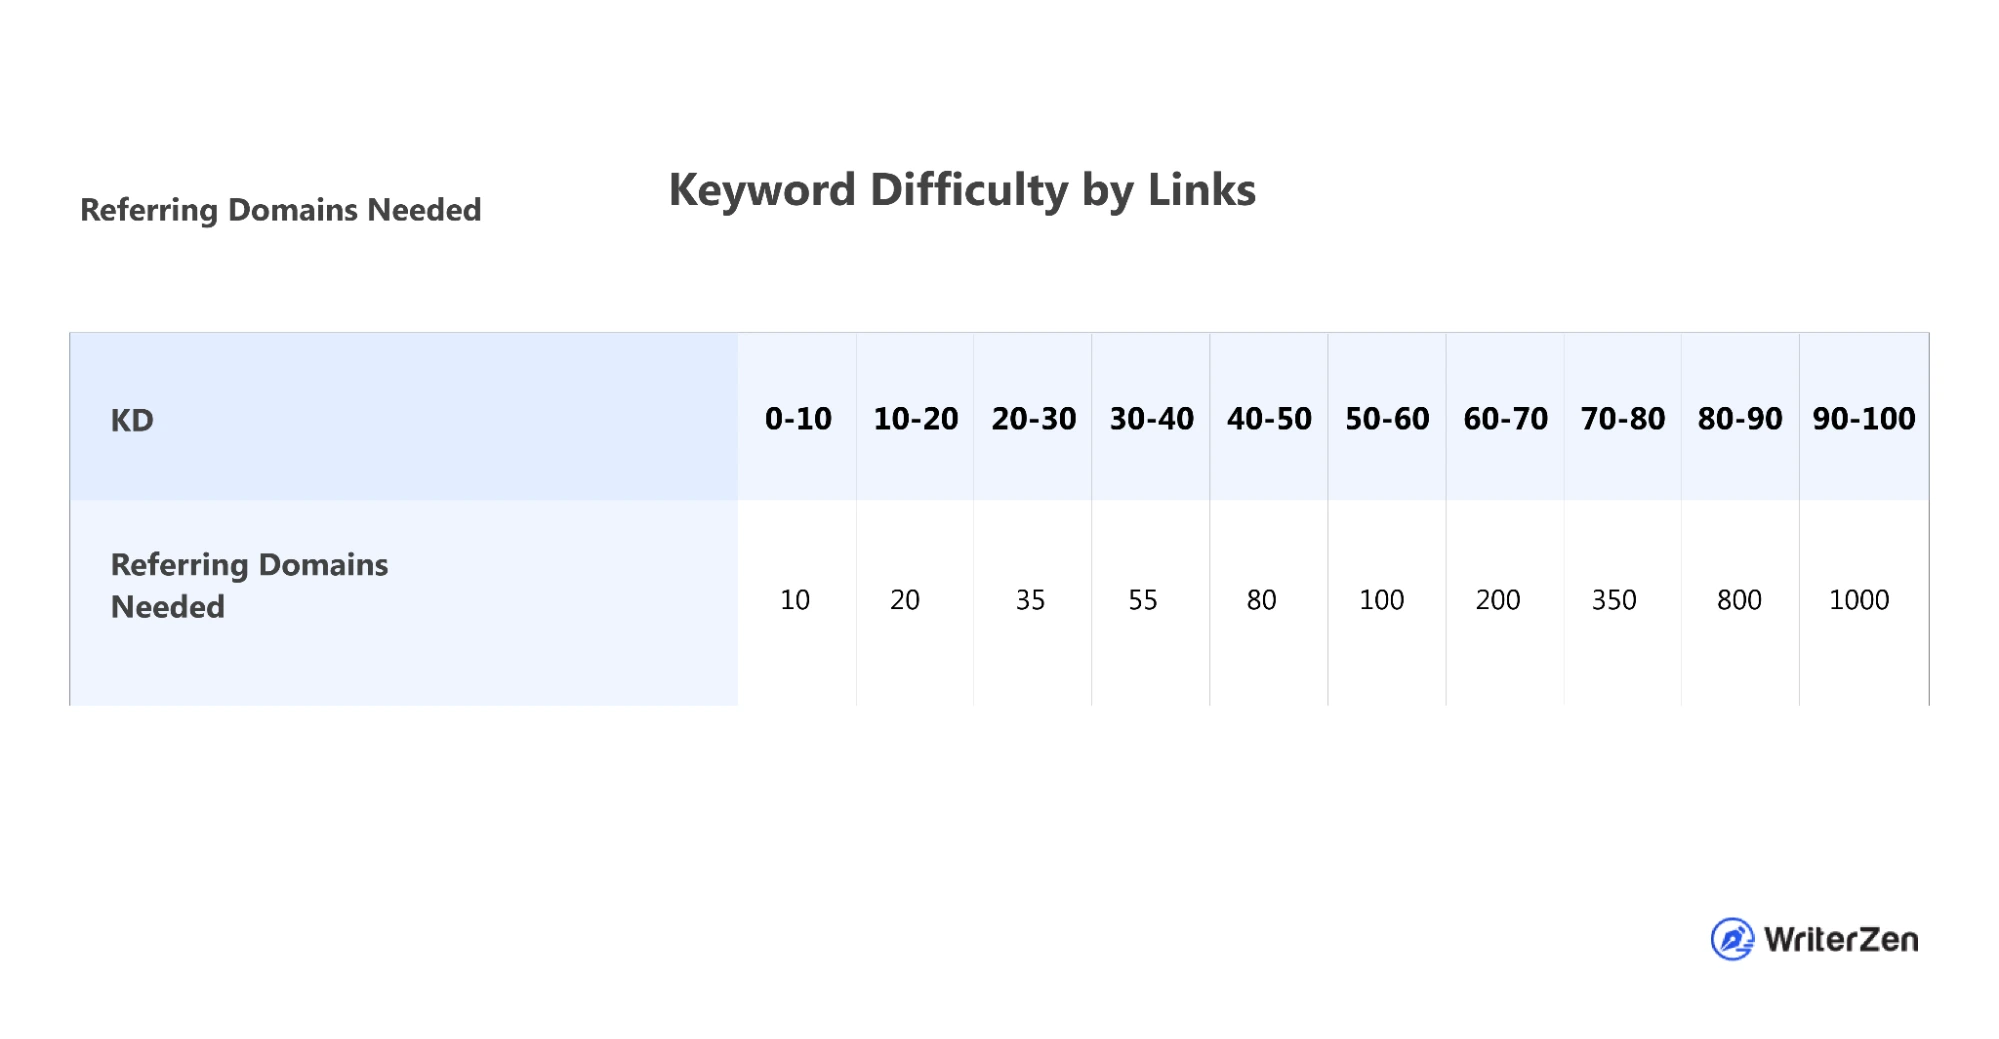 Keyword Difficulty by Links